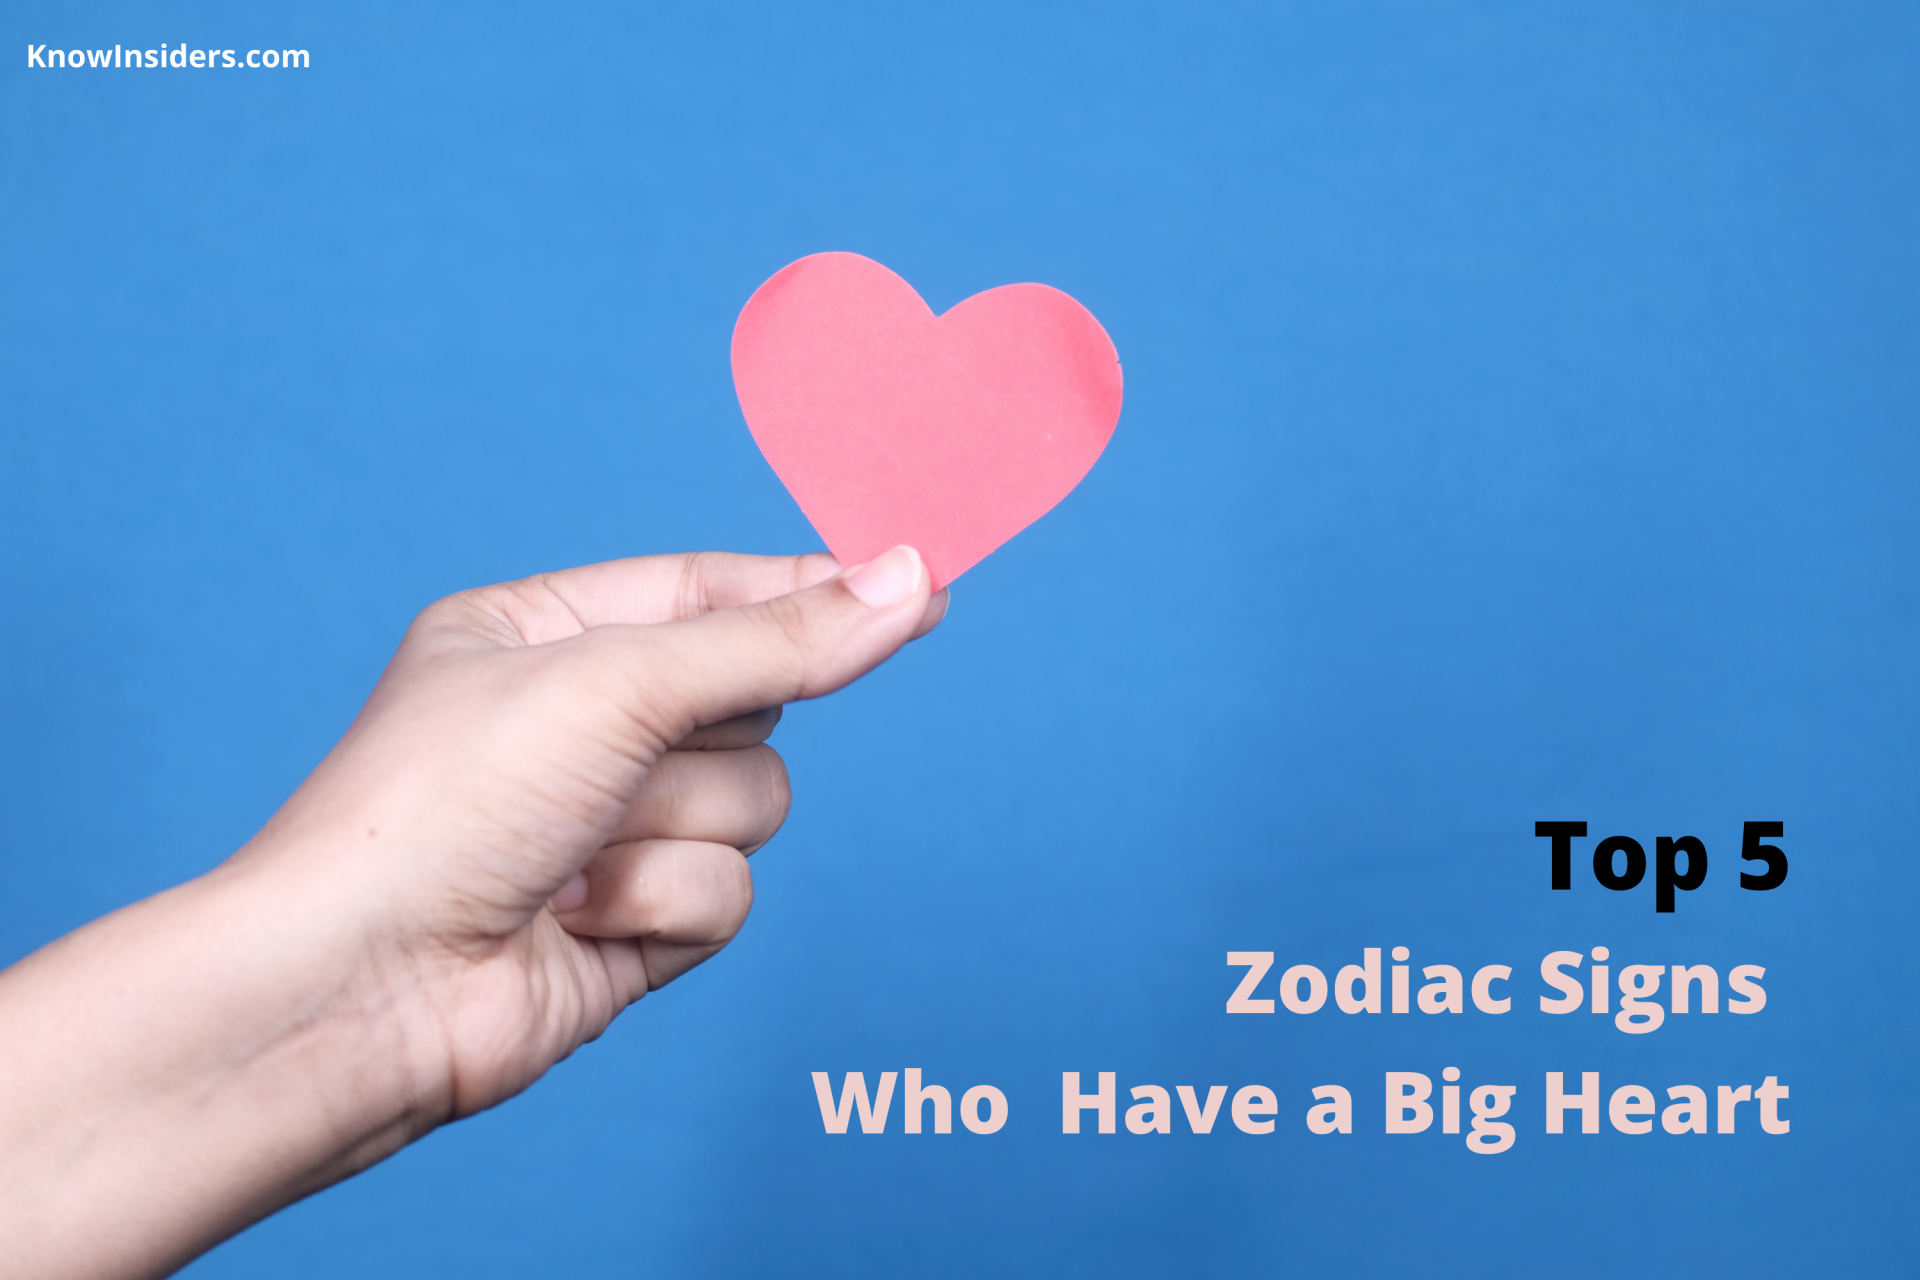 Top 5 Zodiac Signs That They Have a Big Heart